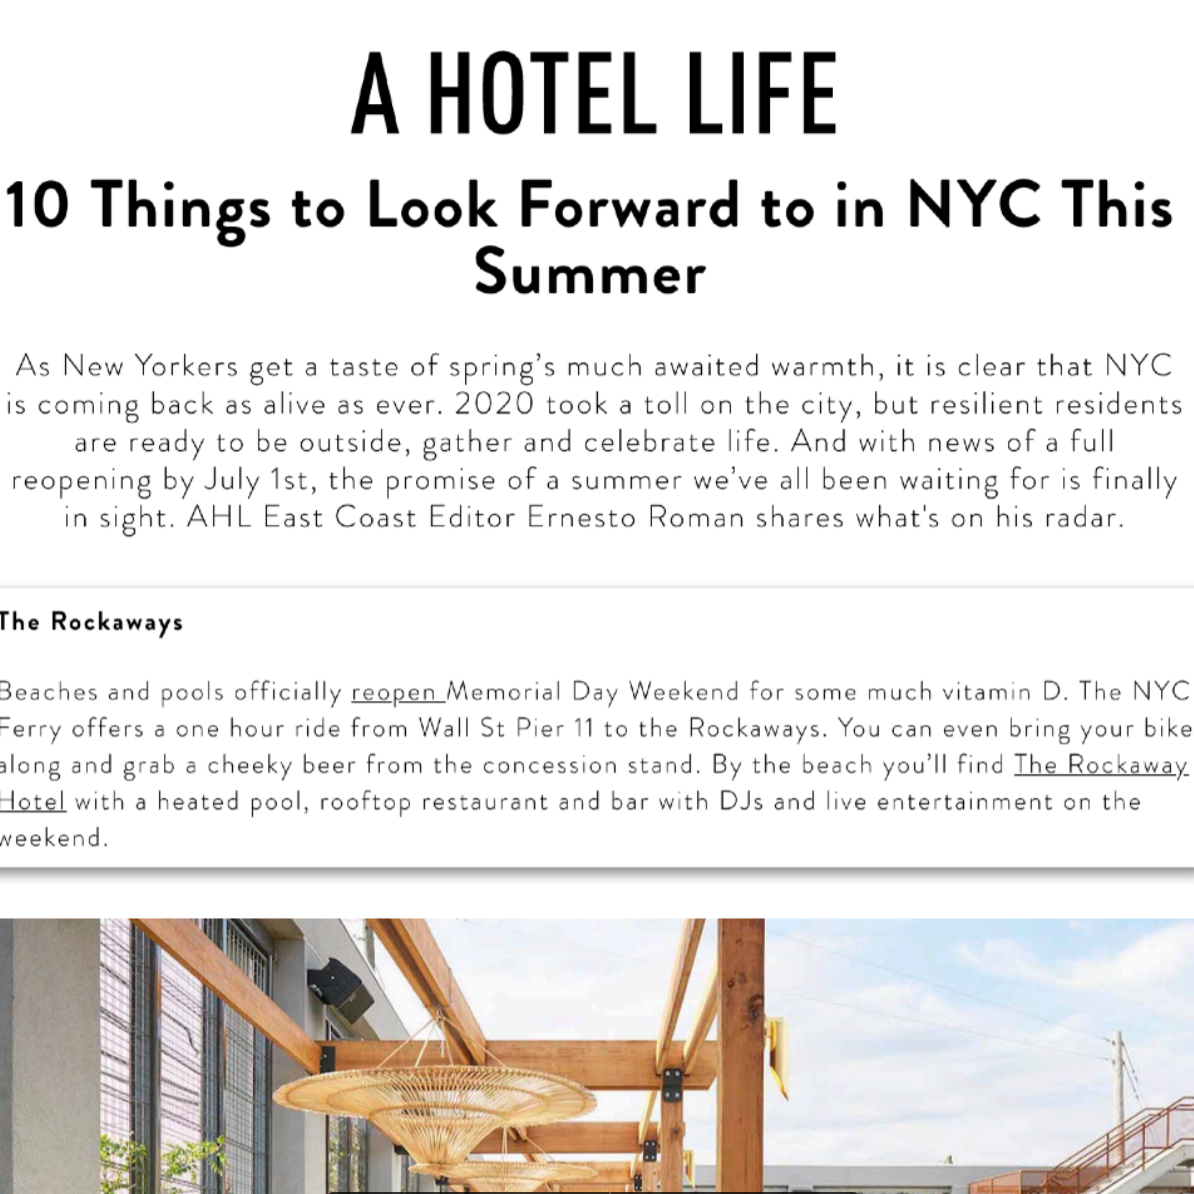 Article about The Rockaway Hotel in Hotel Life